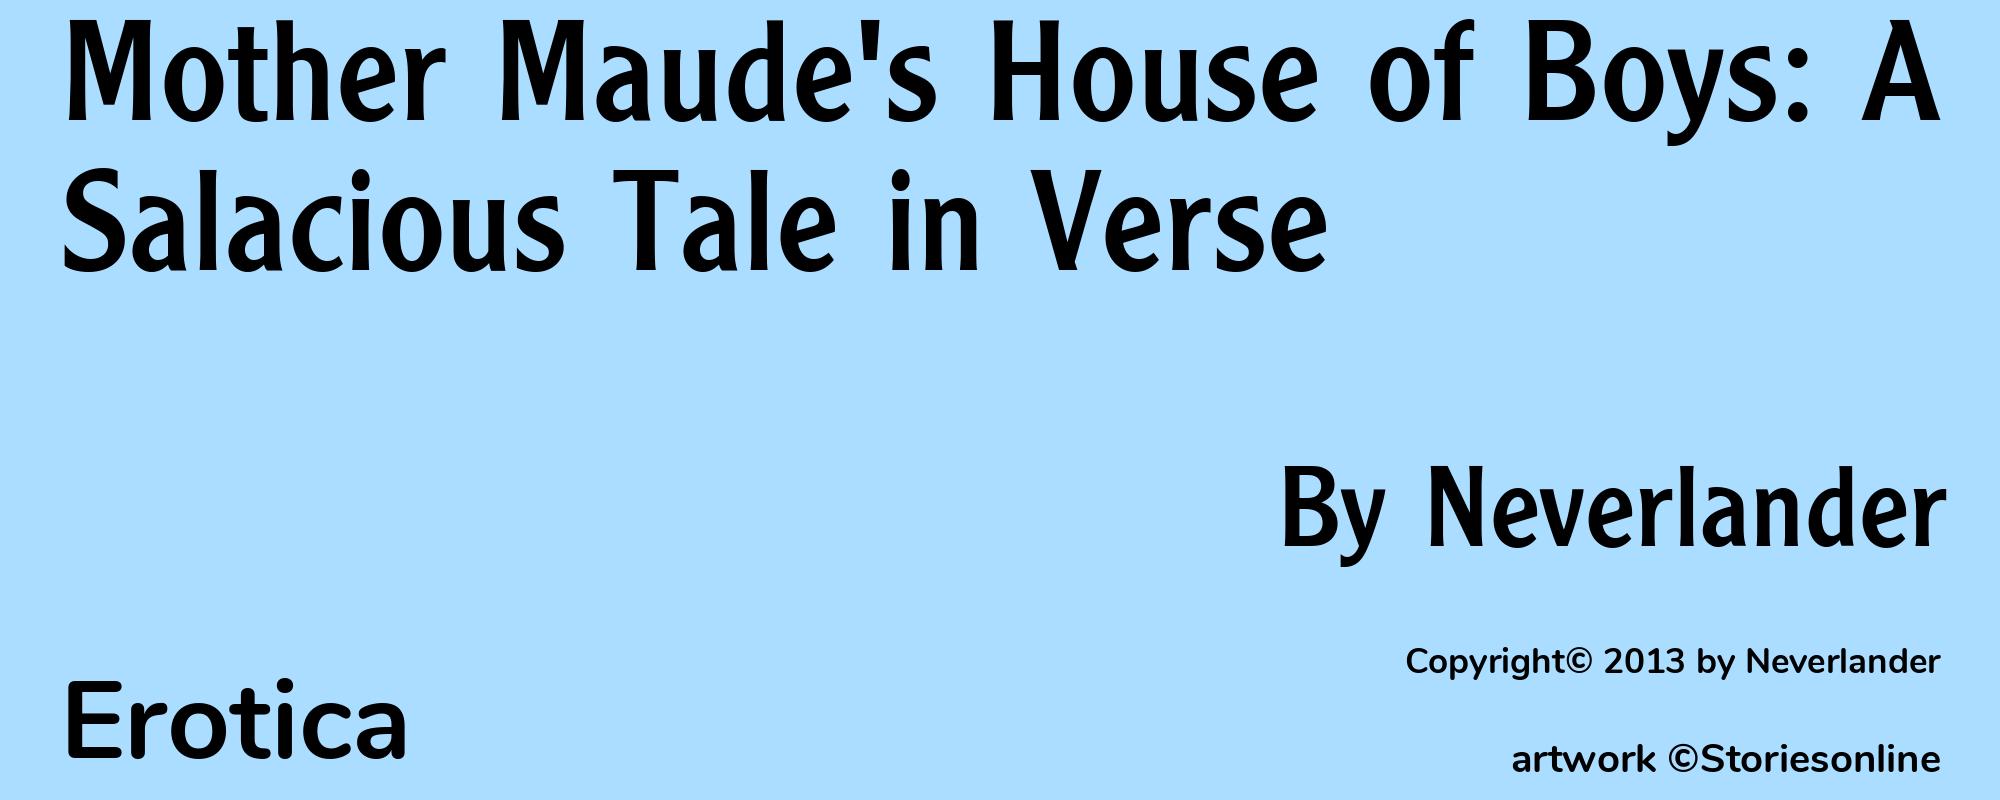 Mother Maude's House of Boys: A Salacious Tale in Verse - Cover